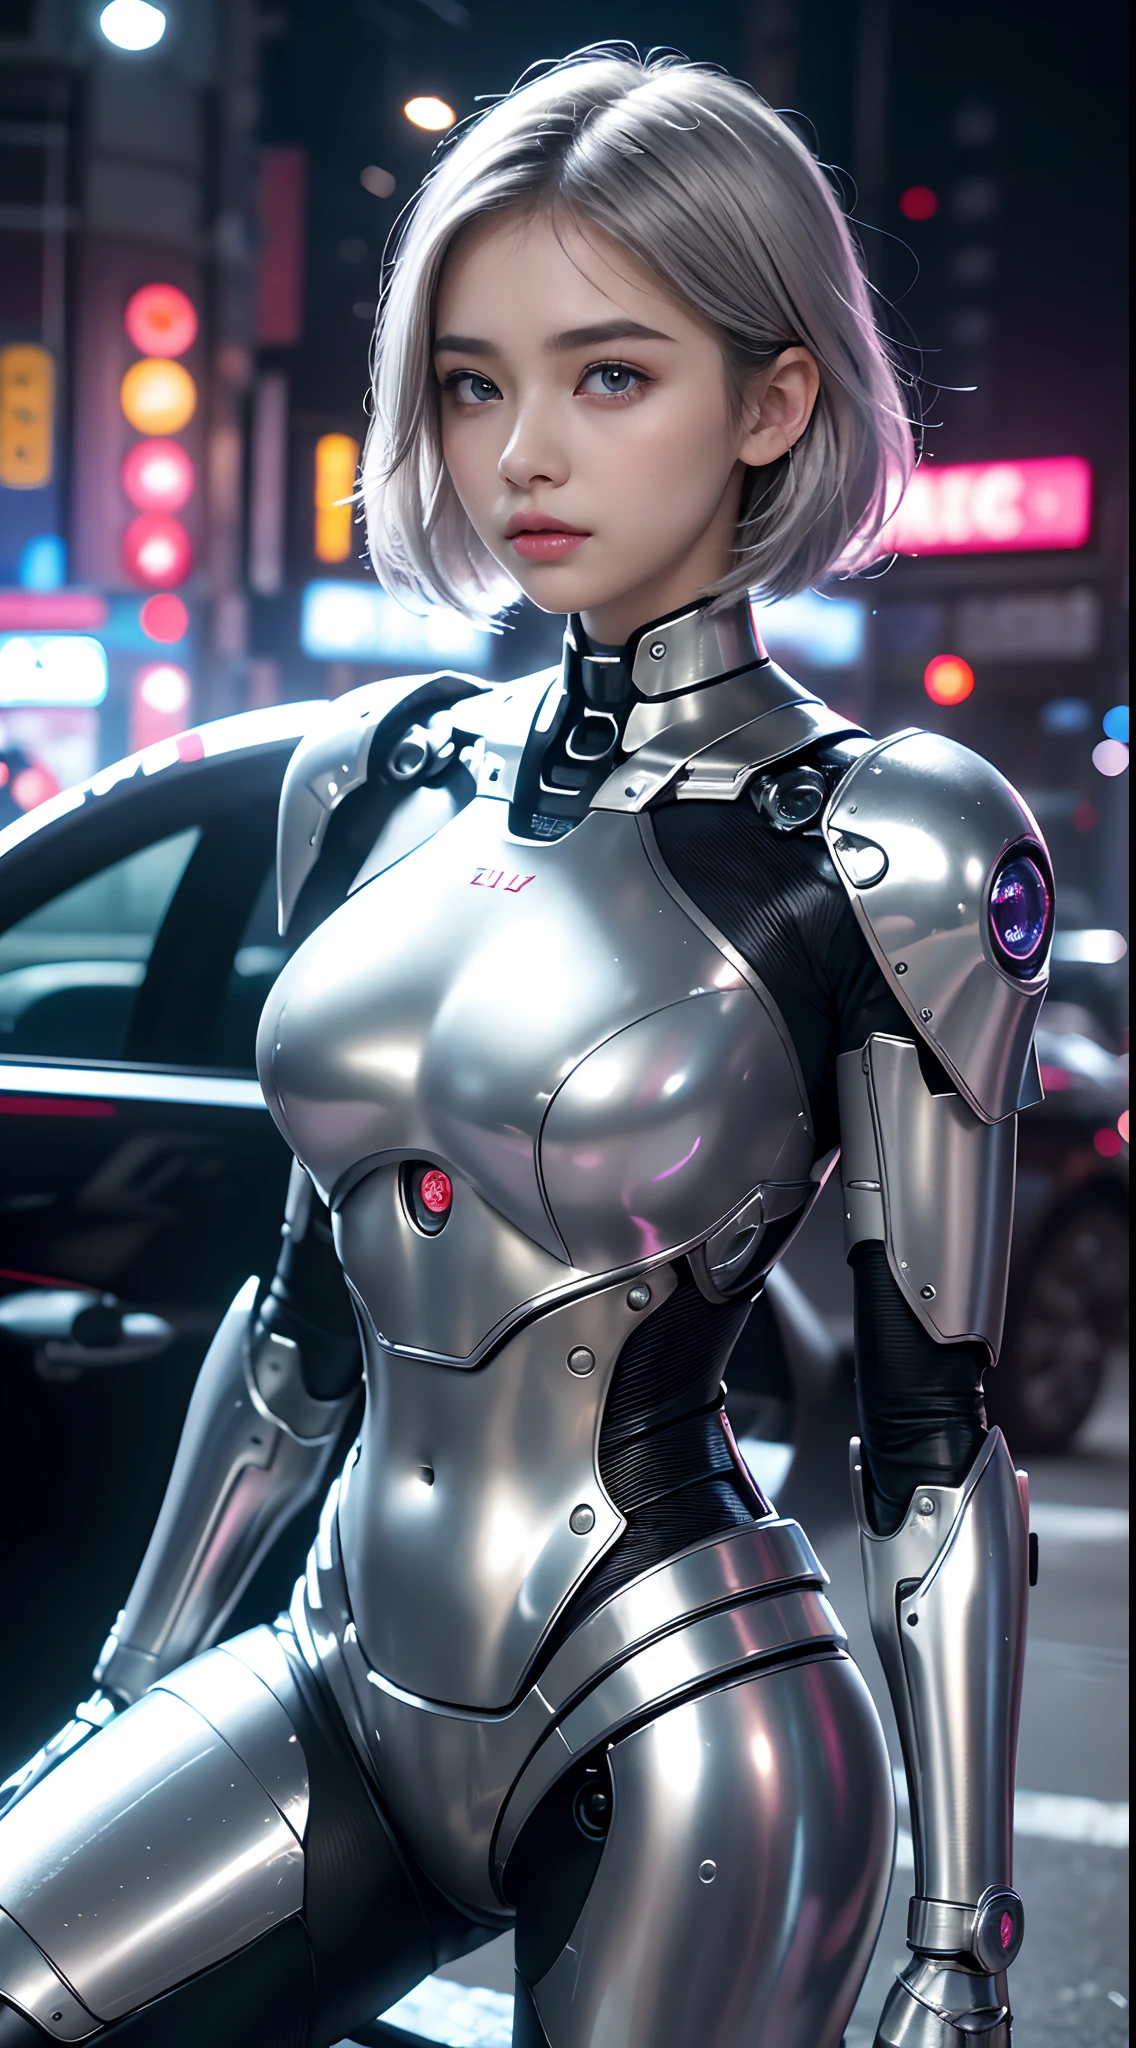 the best ever、(((full body Esbian)))、(((The sheen)))、(((Very shiny metal suit)))、The cute beauty of the mecha(Best Quality, Detailed details, masutepiece, , 8K, Chiaroscuro，Bust photos are ultra-realistic and realistic, Highly detailed Canon videography )、((Beautiful and shining natural eyes))、Beautiful navel、Human skin type、（(Highly photorealistic human beings))、(Perfectly round pupils)、The details of the iris of the pupil are very amazing、(((Shining eyes)))、accurate fingers、Limbs without breakdowns、(((Caucasian 14 year old girl)))、((very fair pink skin))、Naturally closed mouth、Natural areola、natural 、Staring eyes、Natural body、a baby face、Feminine face、Feminine body、(with round face)、a small face、soft cheeks、Looking at the camera、full body Esbian、、Beautiful and shining natural eyes、Beautiful navel、Human skin type、（(Highly photorealistic human beings))、(Perfectly round pupils)、The details of the iris of the pupil are very amazing、Limbs without breakdowns、Naturally closed mouth、Natural areola、natural 、Staring eyes、Natural body、Slightly baby-faced、Feminine face、Feminine body、with round face、a small face、soft cheeks、Looking at the camera、full body Esbian、Balanced face、drooing eyes、(Not a crushing eye)、Body with human-like proportions、((Slightly longer arms))、((rather long torso))、((slightly larger hands))、human face、(((Glowing silver hair)))、(((Cool Shortcut Hair)))、(((The background is the future)))、(((8 Head Body)))、(((Light blue eyes)))、(((Thin thin silver eyebrows)))、(((Thin eyebrows)))、Looking at this、Gentle double eyelids、(((Gentle face)))、(((Background Mecha)))、bladerunner、(((RoboCop)))、Ghost in the Shell、(((Night background)))、(((Makeup is light)))、(((The quality of Hollywood sci-fi movies)))、(Neon light)、(((Tokyo in 6000 AD)))